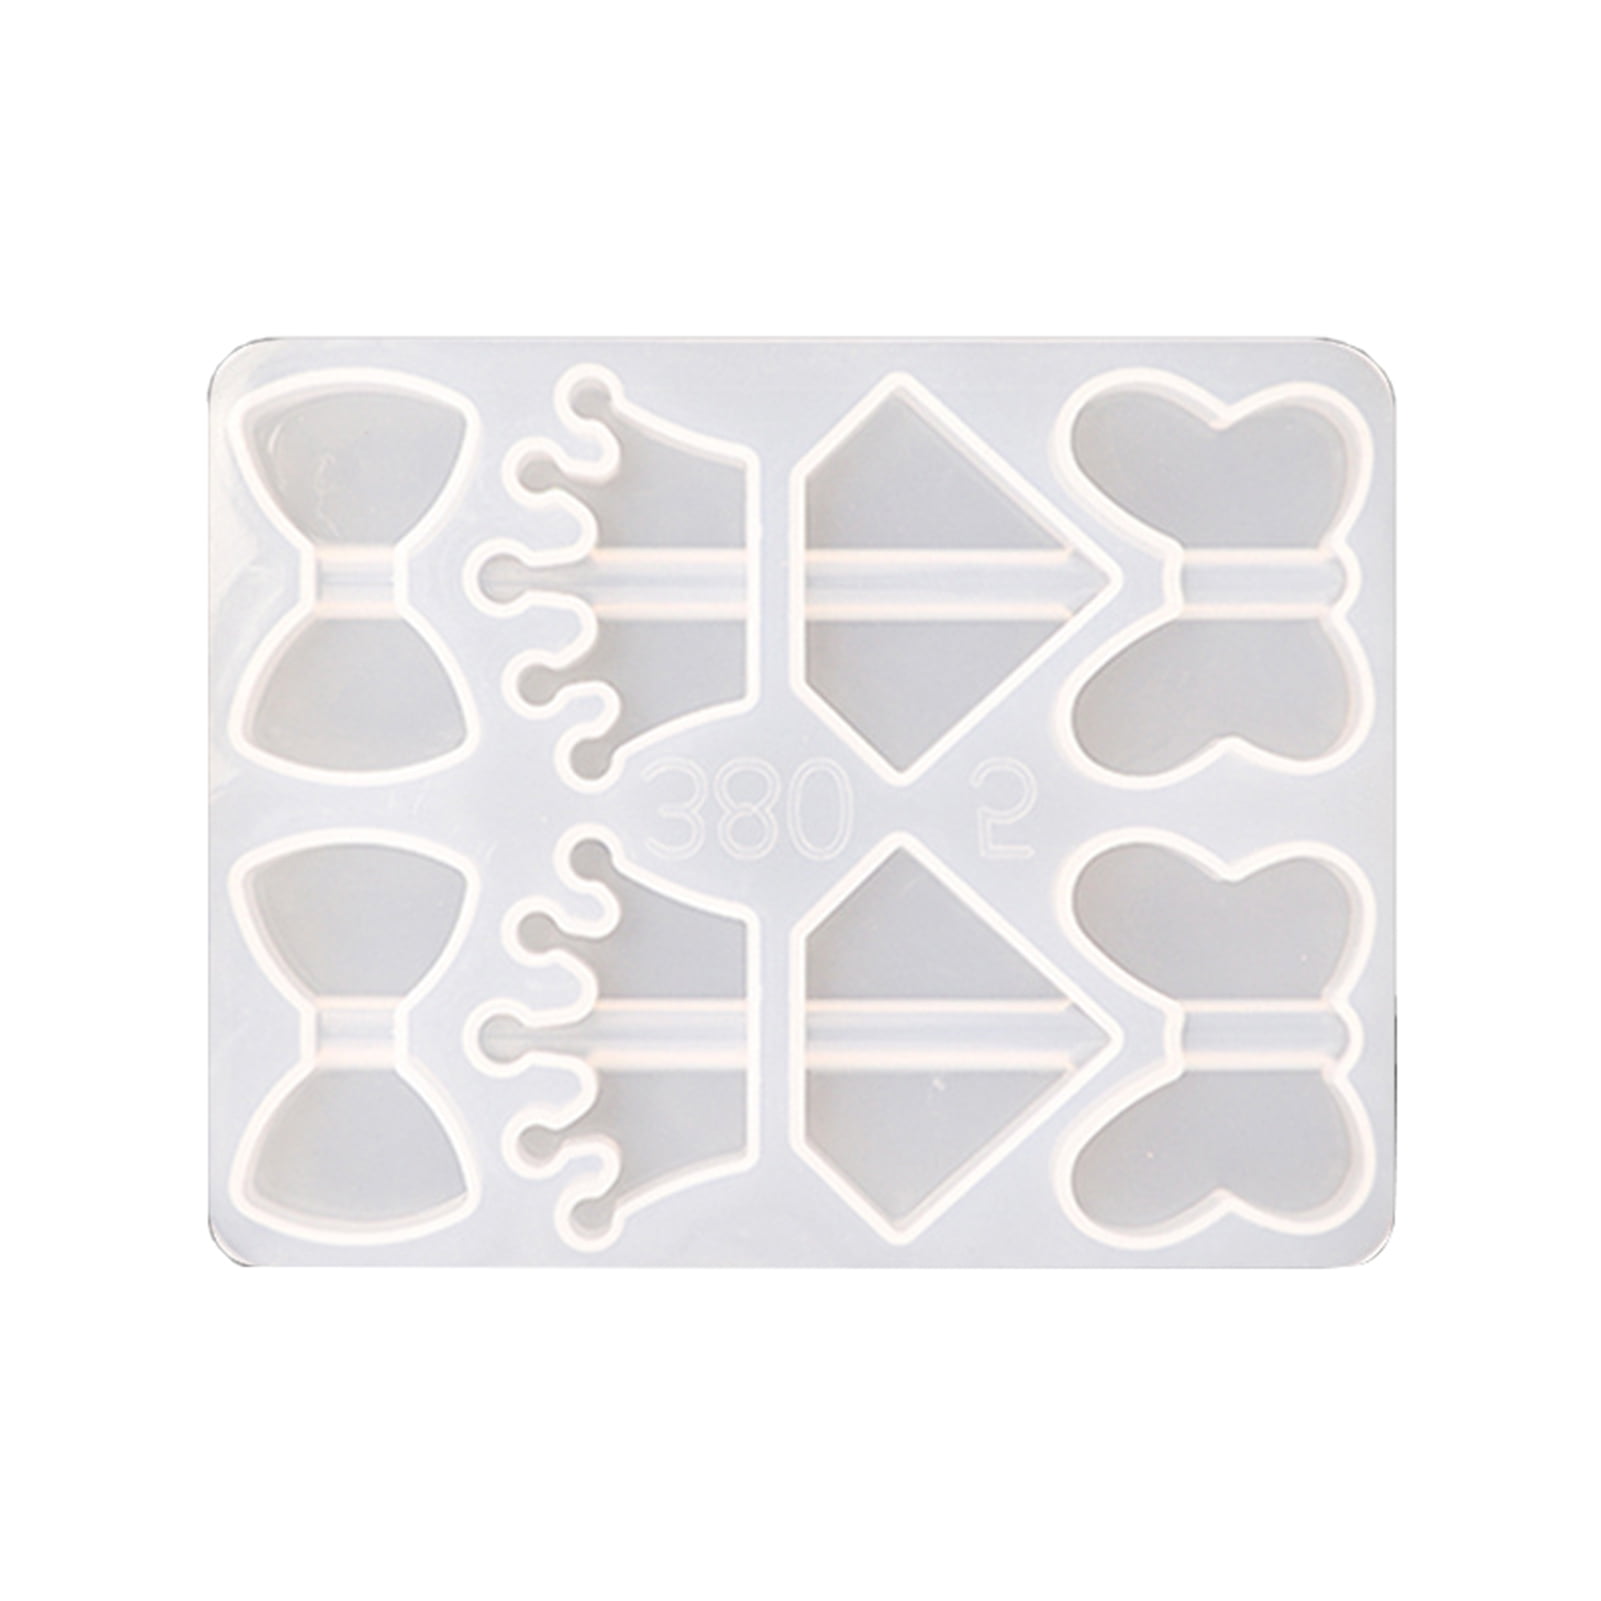 Hevirgo Straw Topper Mold Durable Easy Release Silicone Straws Epoxy Casting Mould for Crafts Making Clear Silicone, Size: 1